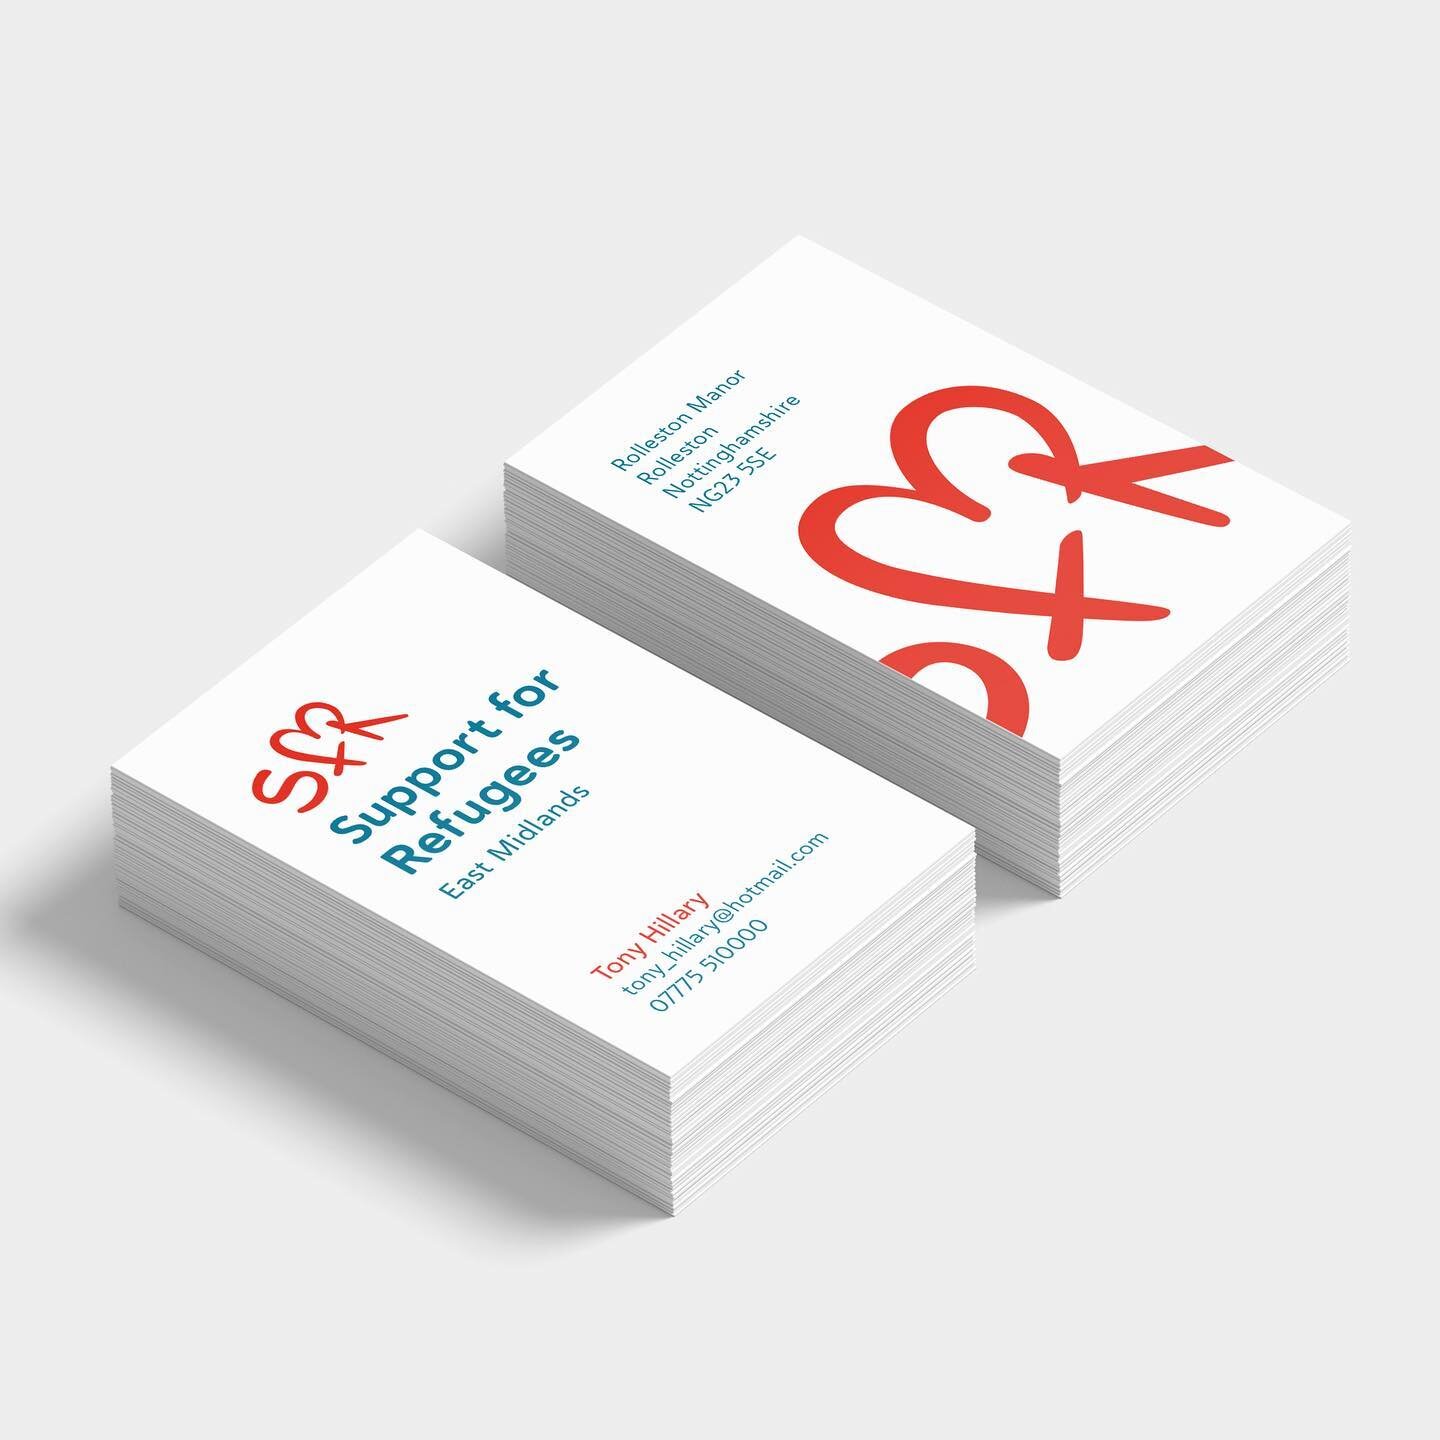 Two personalised sets of Support for Refugees East Midlands business cards, designed and supplied to Tony and Michelle Hillary. 📦

Clean design with a focus on the heart on the reverse of the card. ❤️
.
.
.
.
.
.
#businesscards #brandingidentity #su